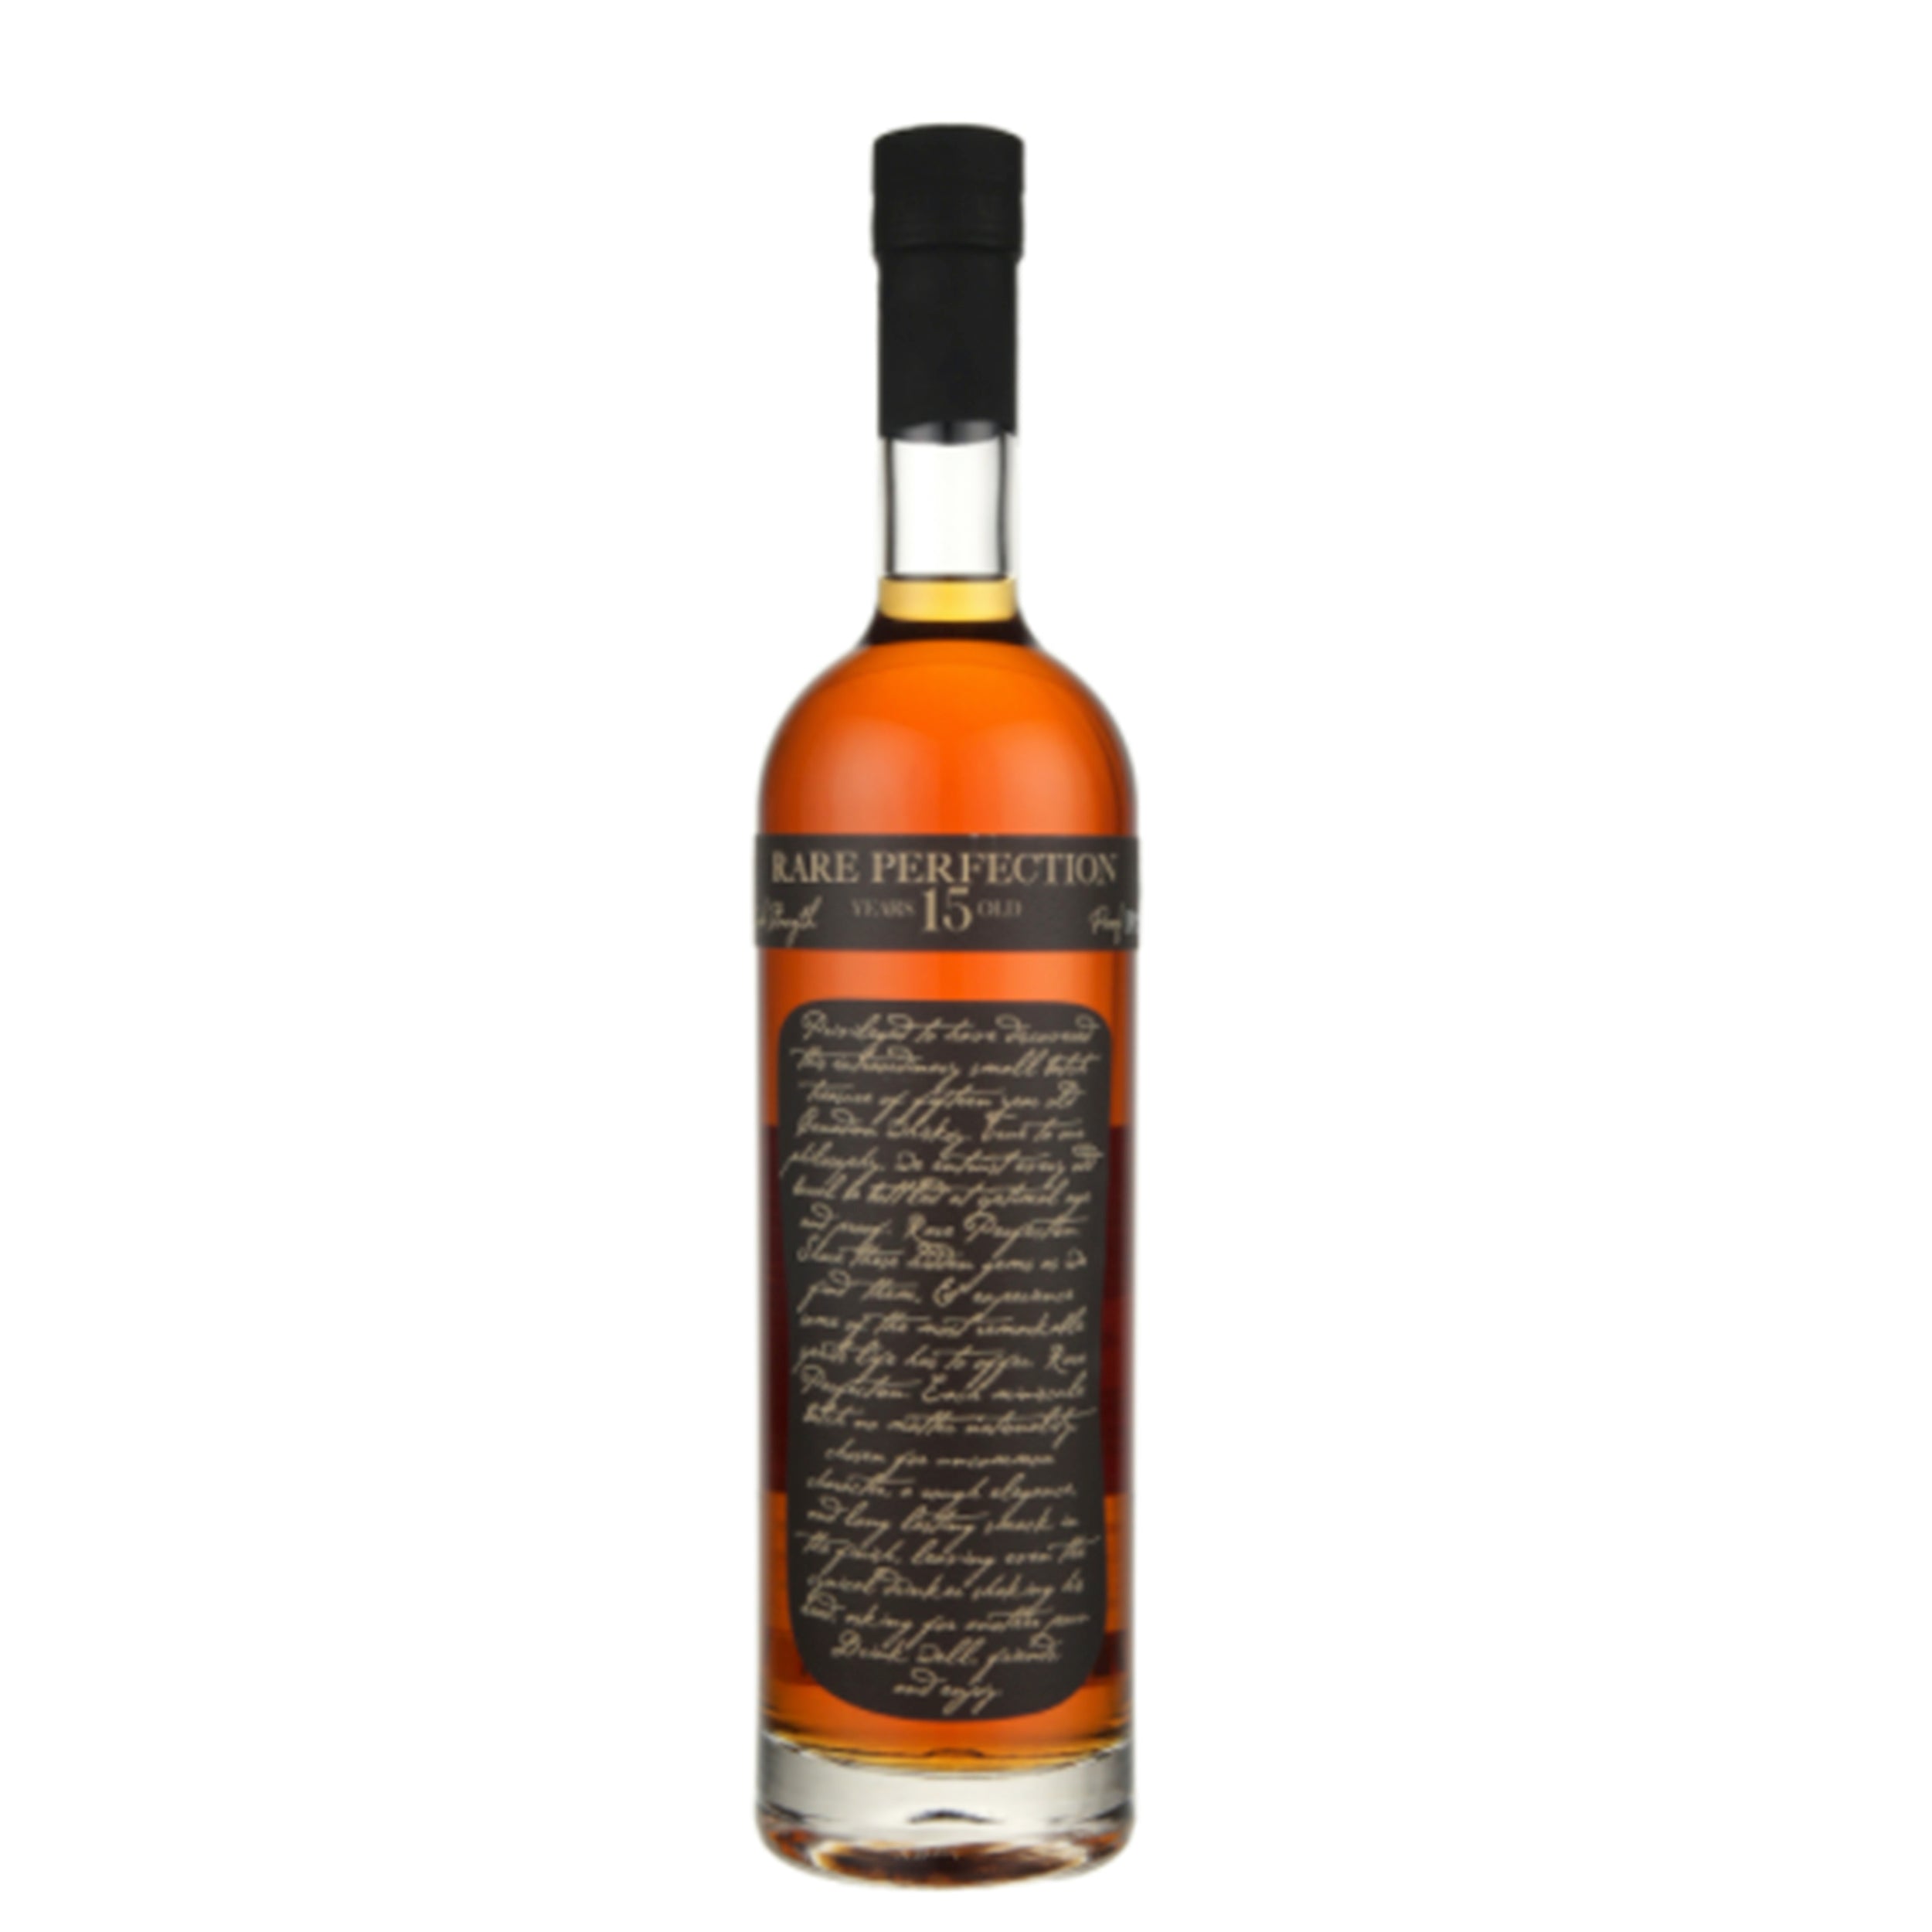 RARE PERFECTION CANADIAN WHISKY CASK STRENGTH 15 YR